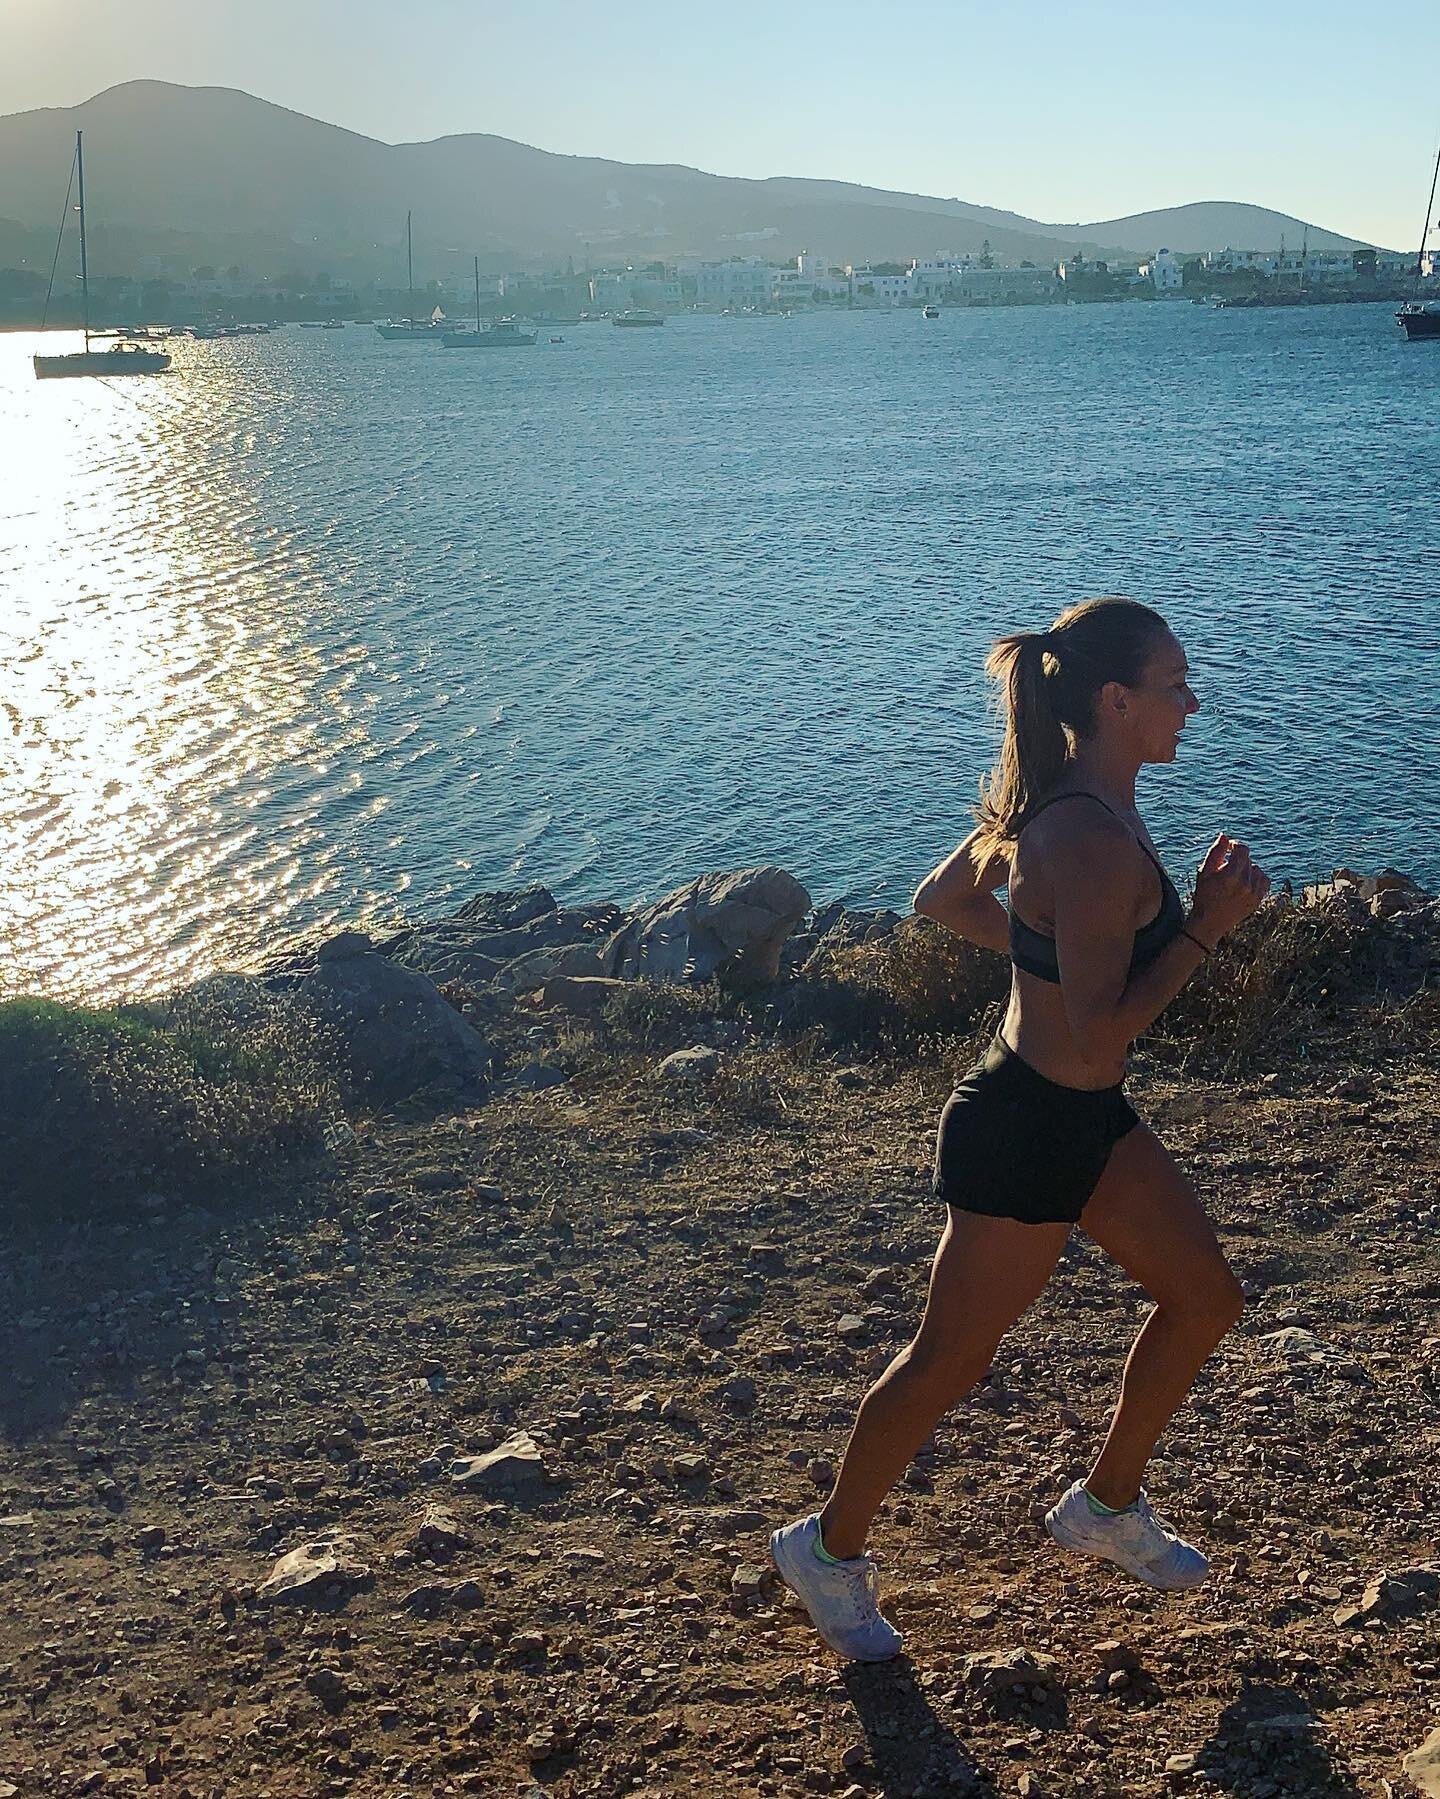 My perfect day starts with a run by the sea. I feel energised, recharged and stress free 🦋🌊
How does it start yours? 

#perfectday #sea #seaside #run #energy #energyhealing #recharge #rechargeyourself #stressfree #fit #fitness #fitnessmotivation